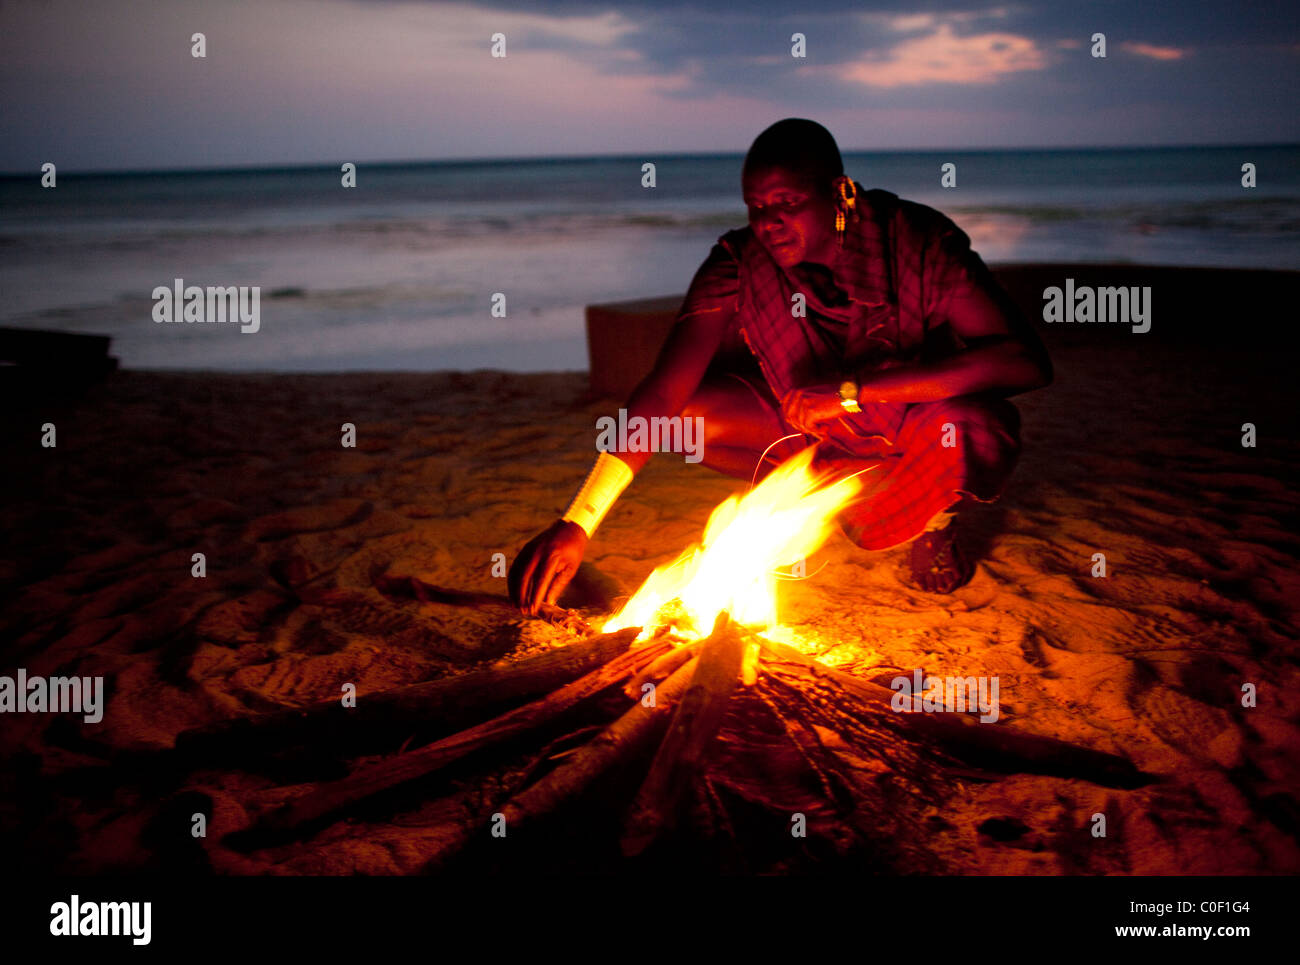 A member of  the Maasai tribe in northern Tanzania, working as a watchmen for local hotels, tends to a bon fire on the beach. Stock Photo